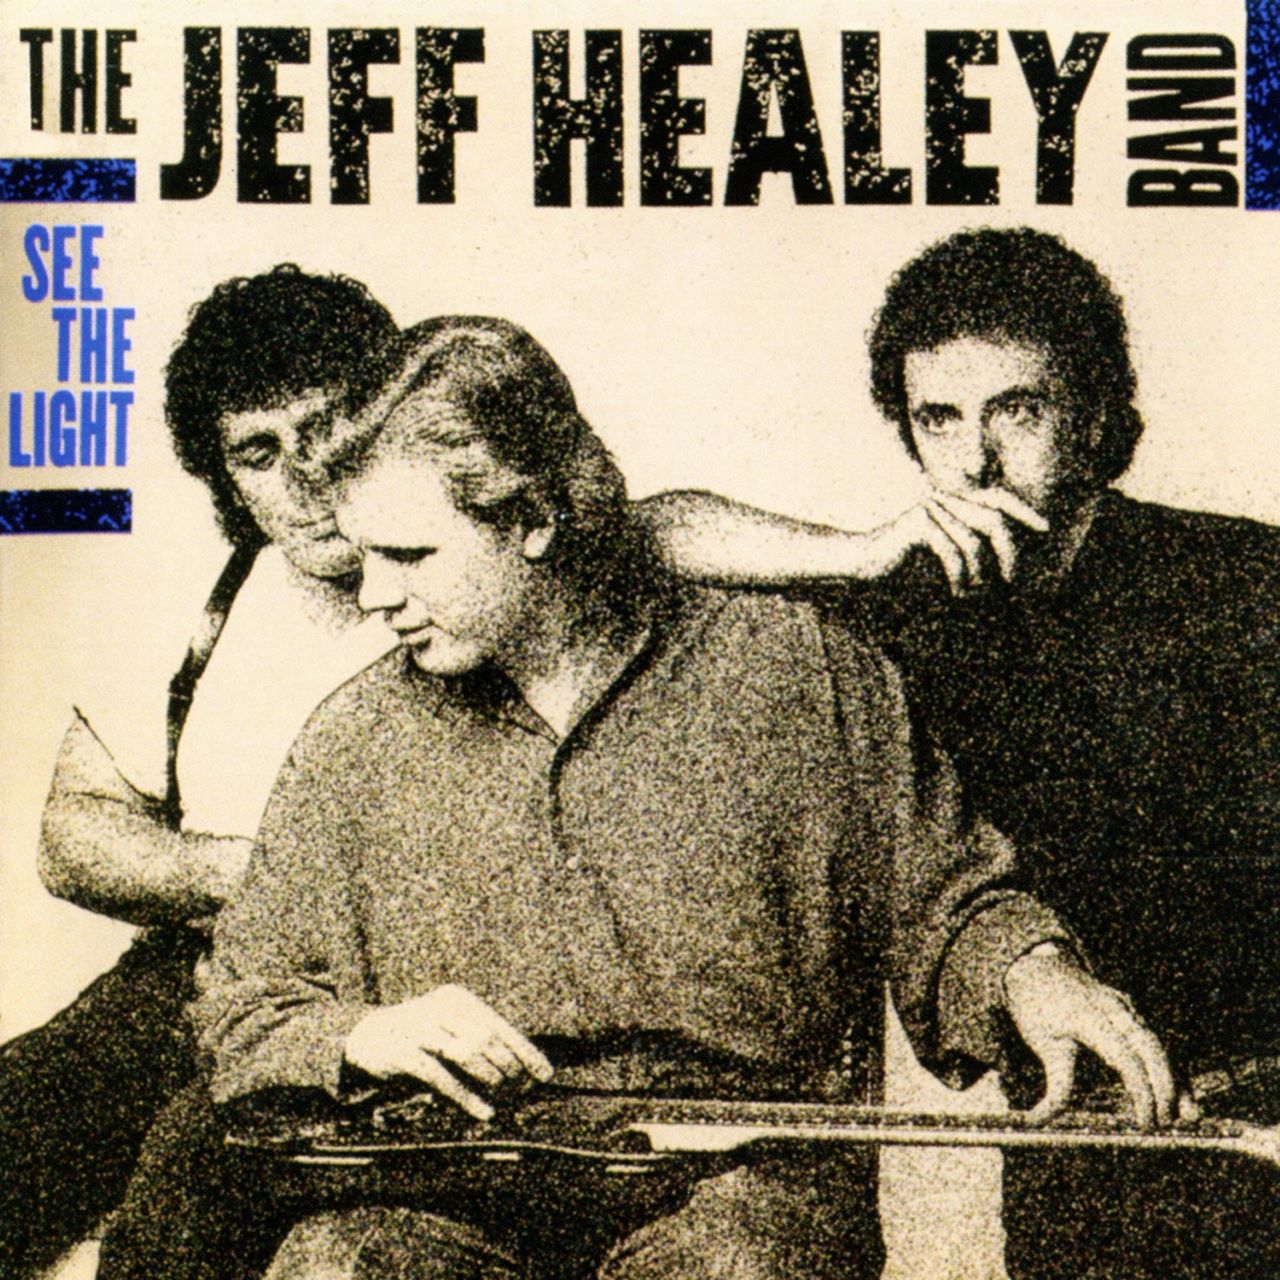 Jeff Healey Band - See The Light cover album